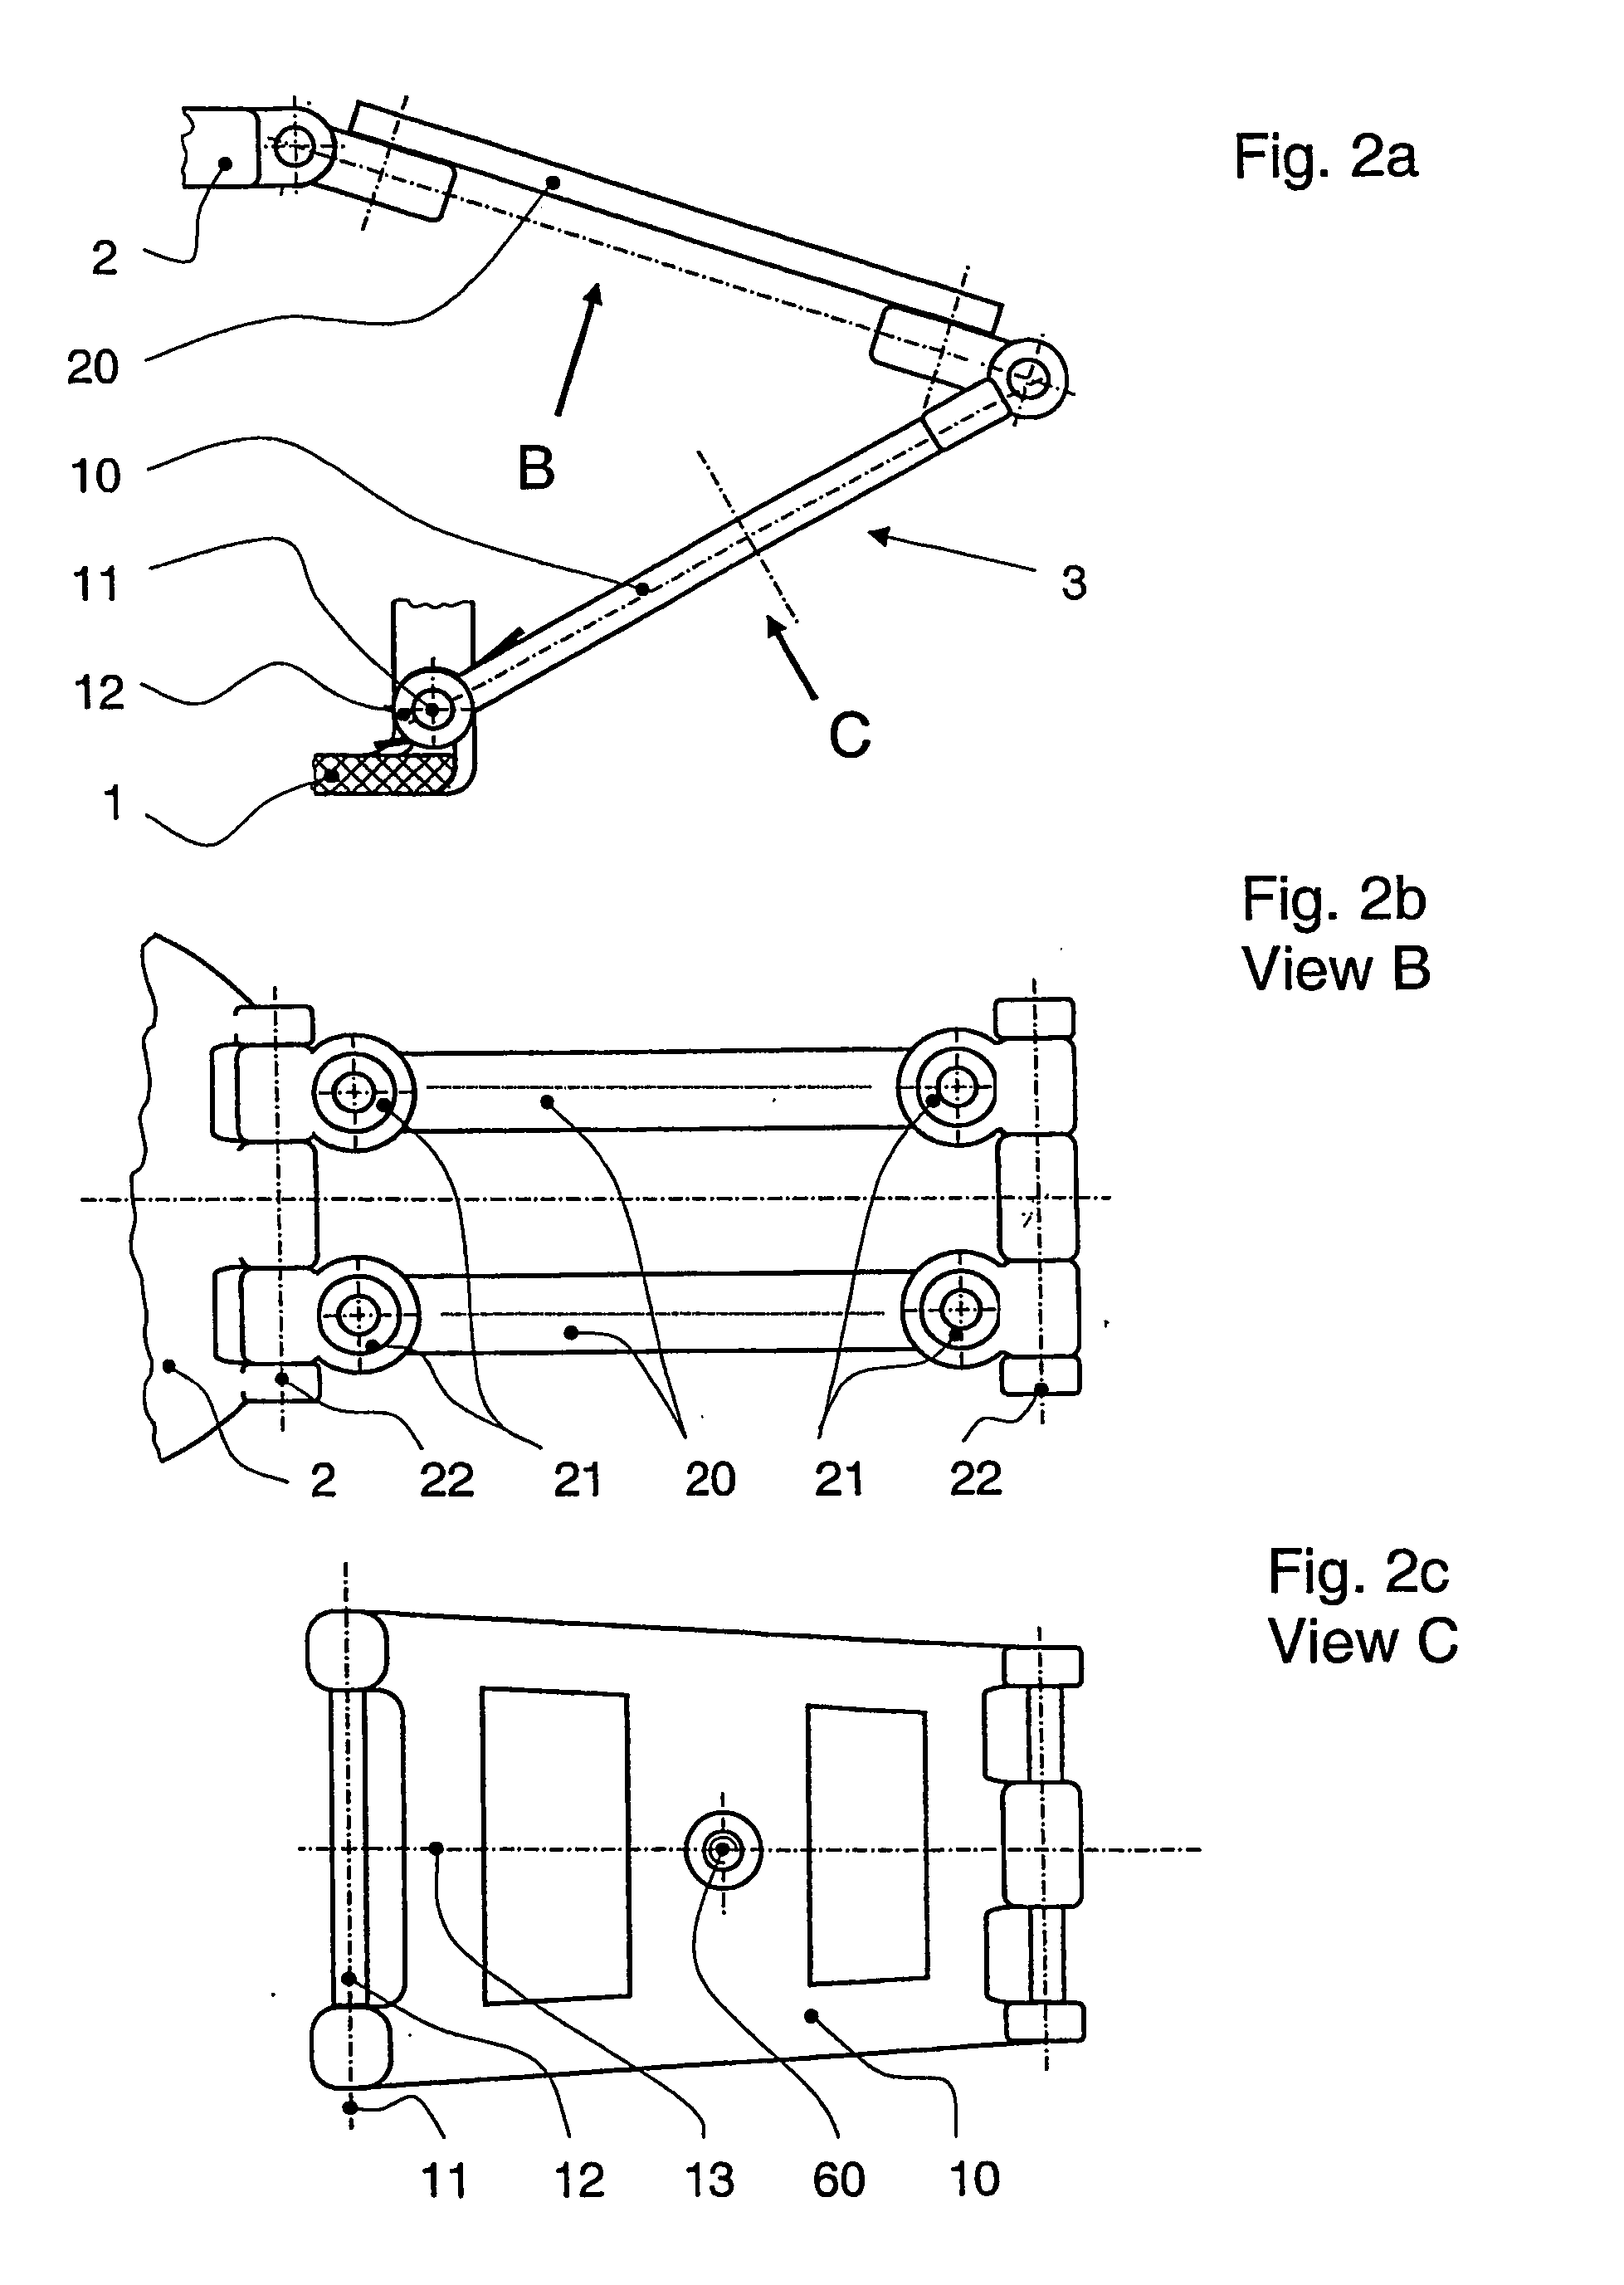 Device for transmitting a movement having a parallel kinematics transmission structure providing three translational degrees of freedom